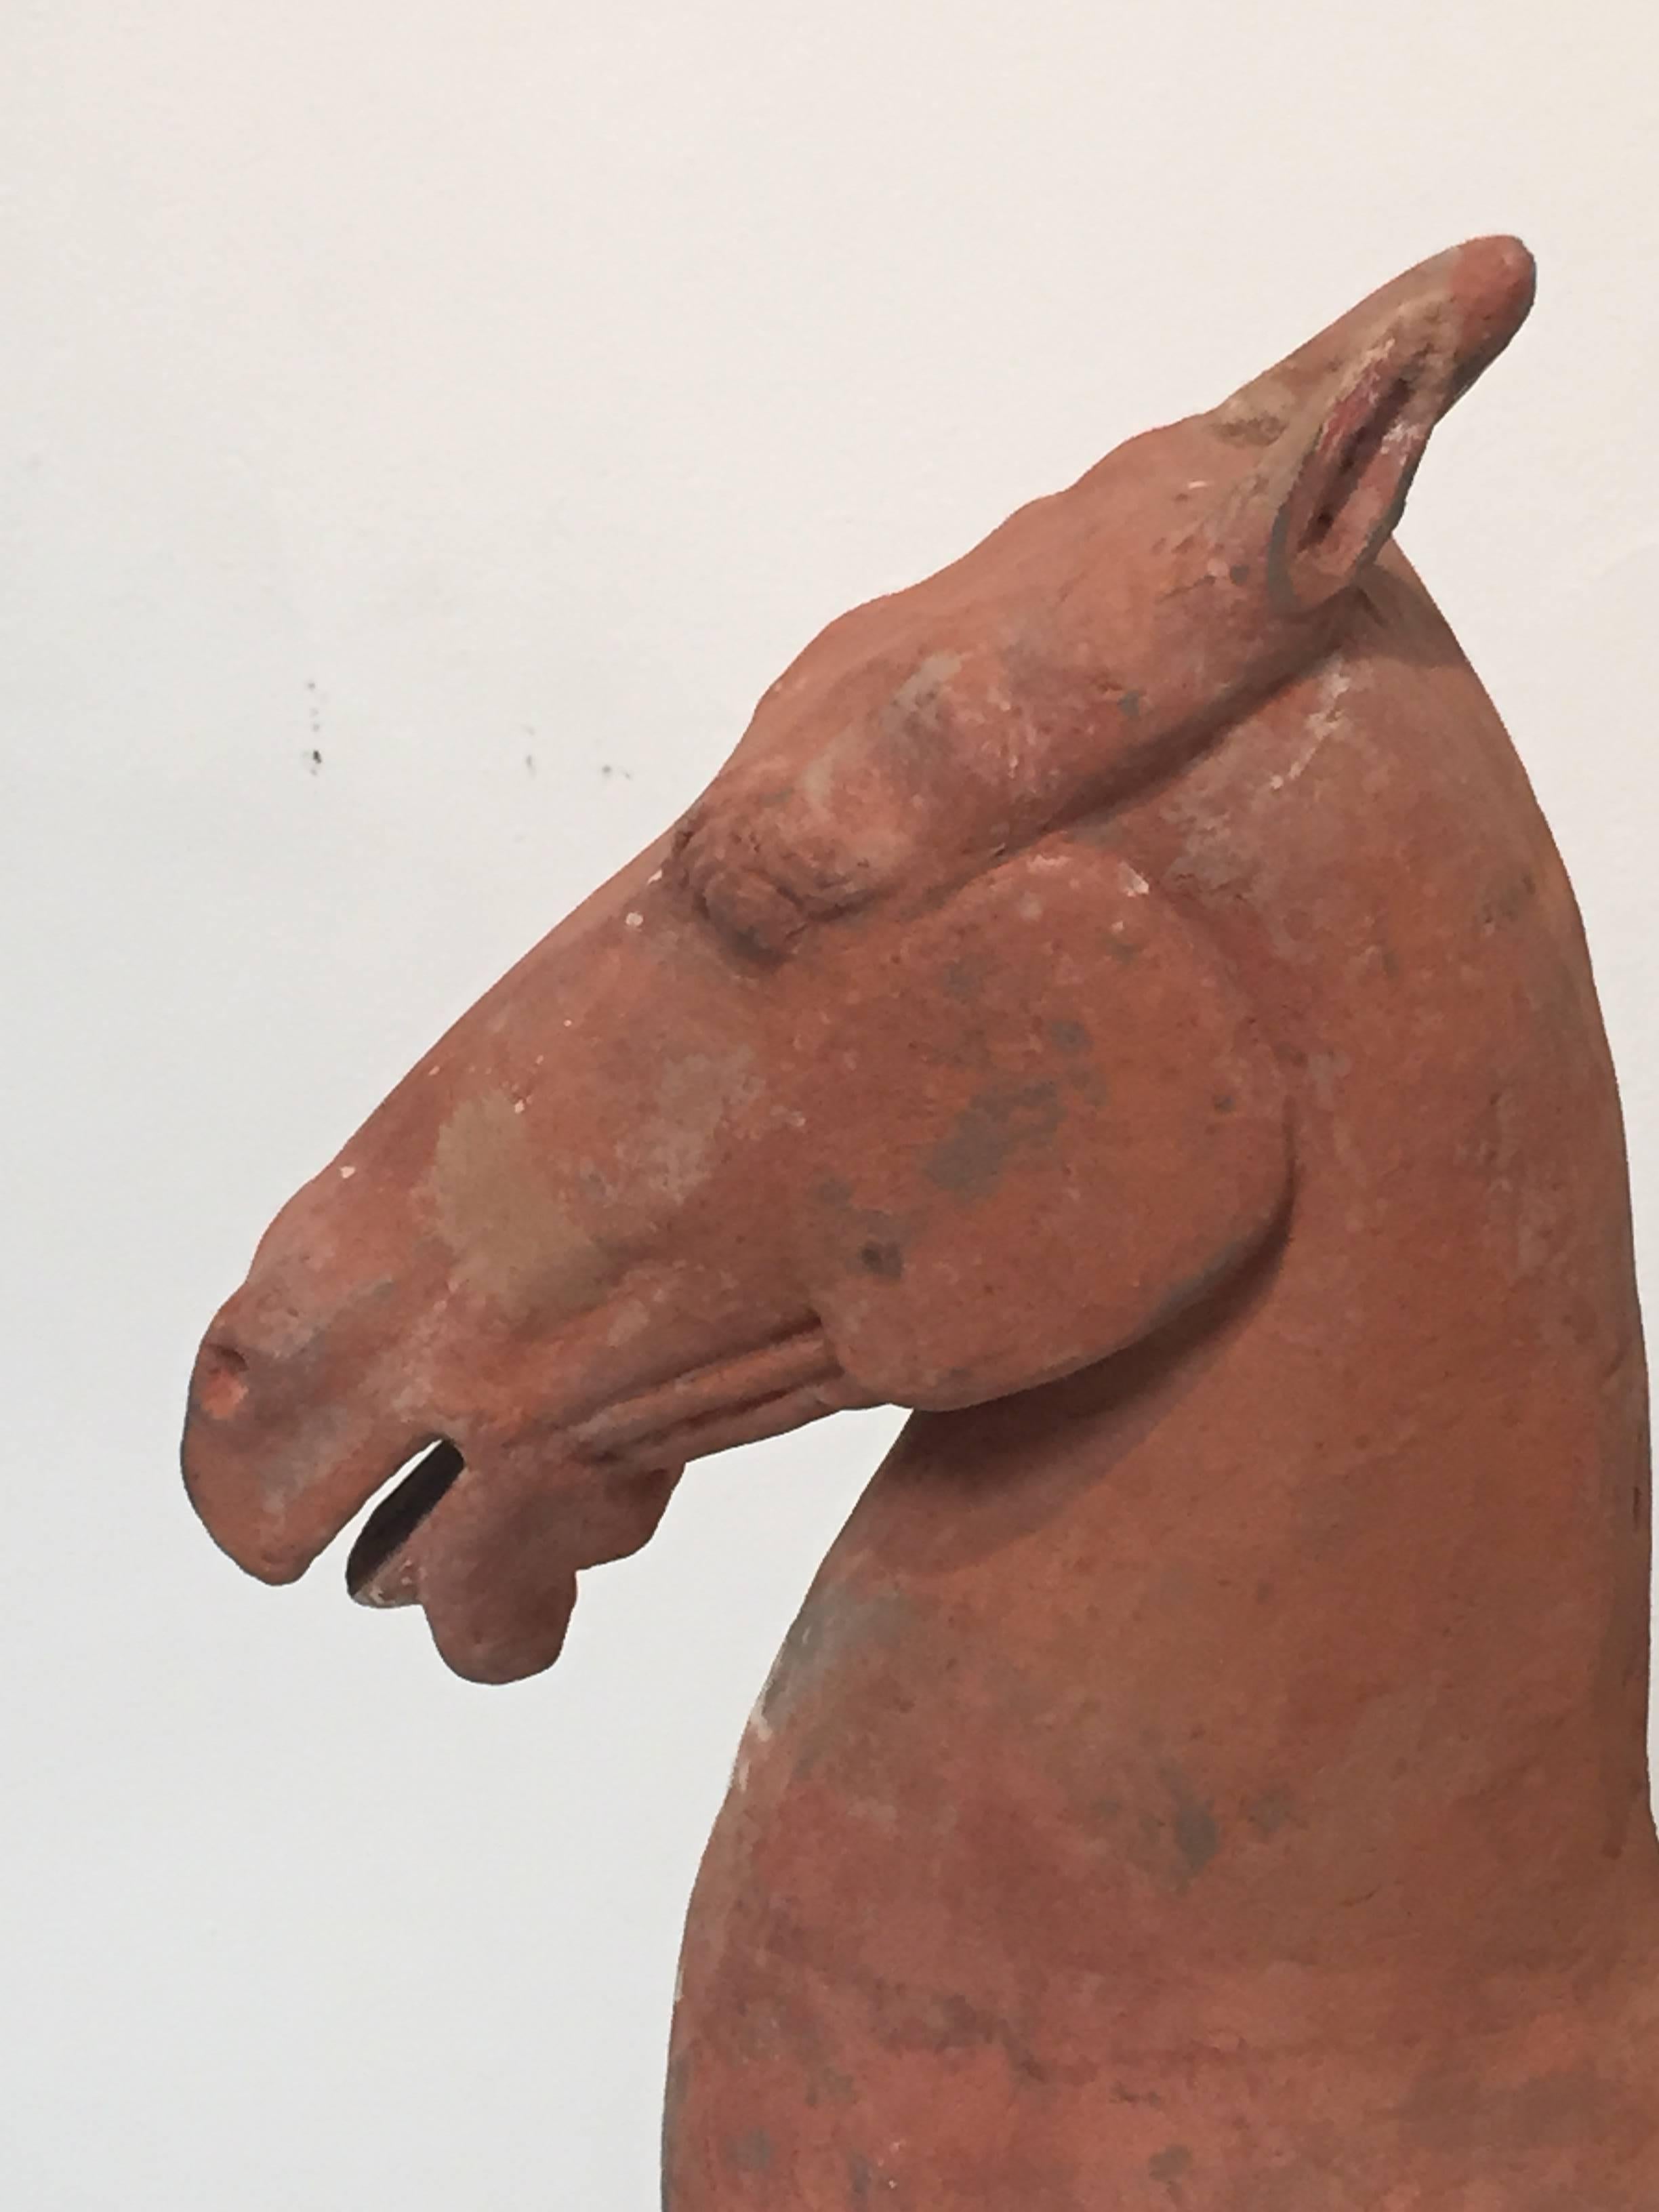 Offered by J R Richards
A Han dynasty (206BC - 220 AD) horse with pigment covering the grey clay body.
Standing foursquare, with mouth slightly open and ears pointed up, this is a Classic early example of Han Craftsmanship.
This ancient sculpture